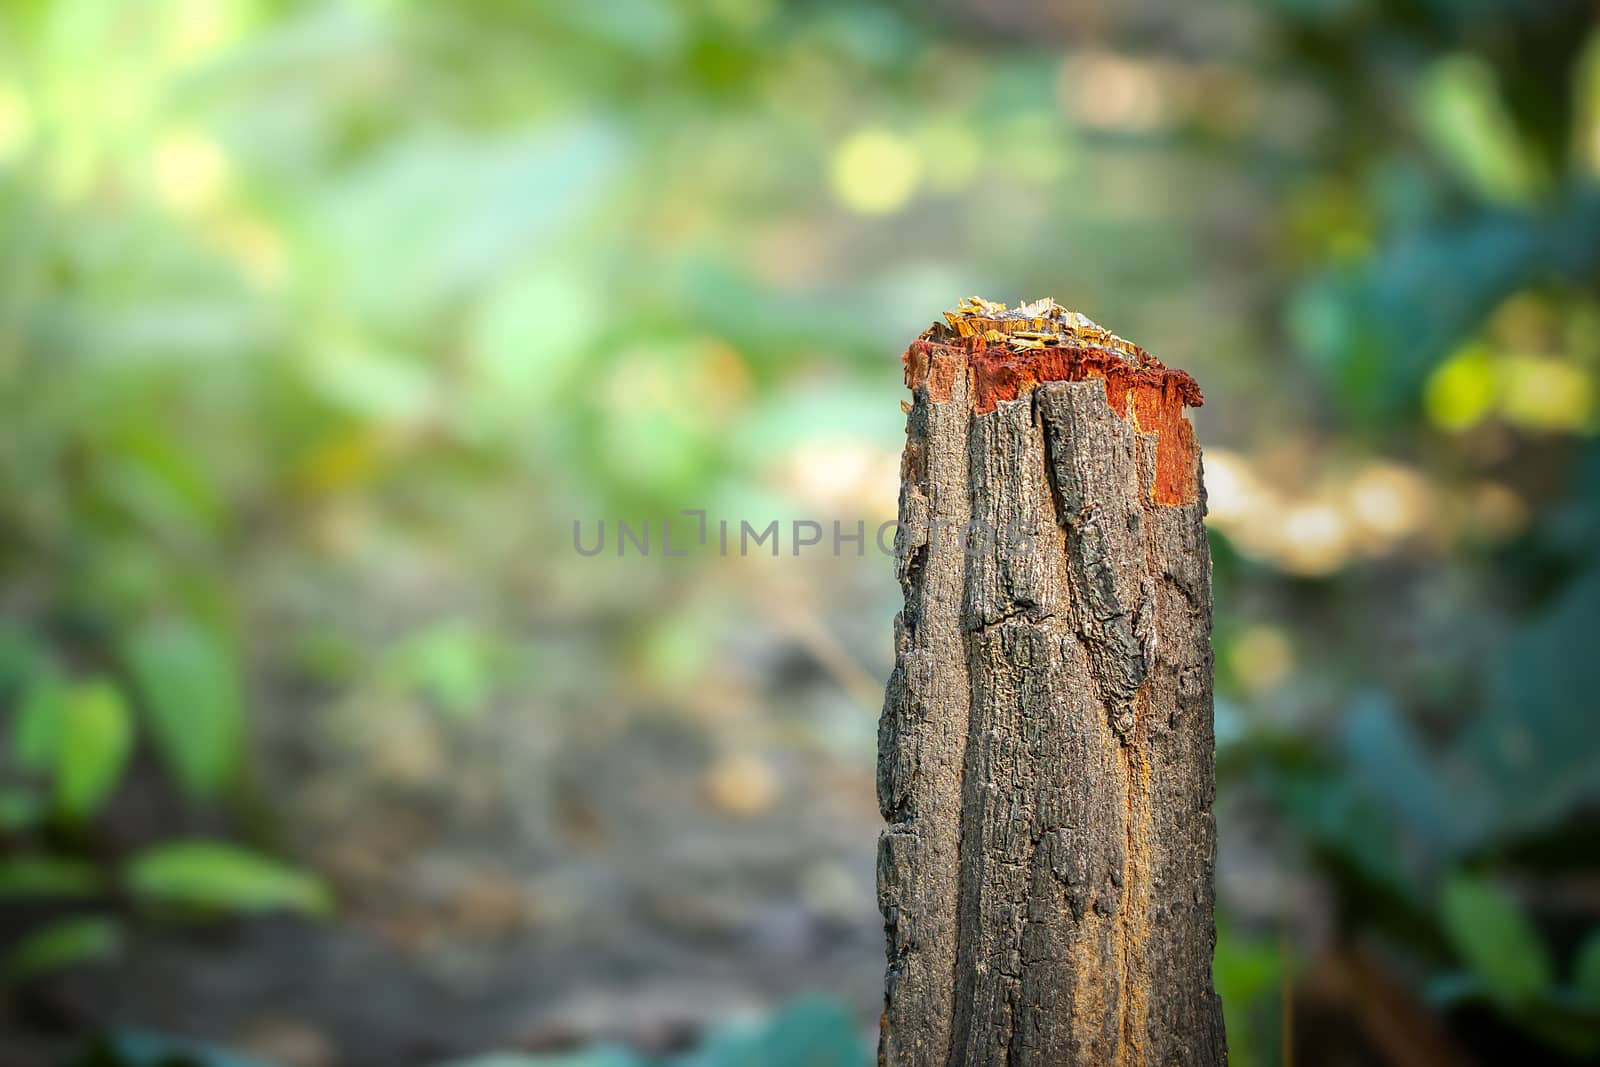 Tree stump and green natural background in forest. Concept of nature conservation and global warming. Campaign to stop deforestation.